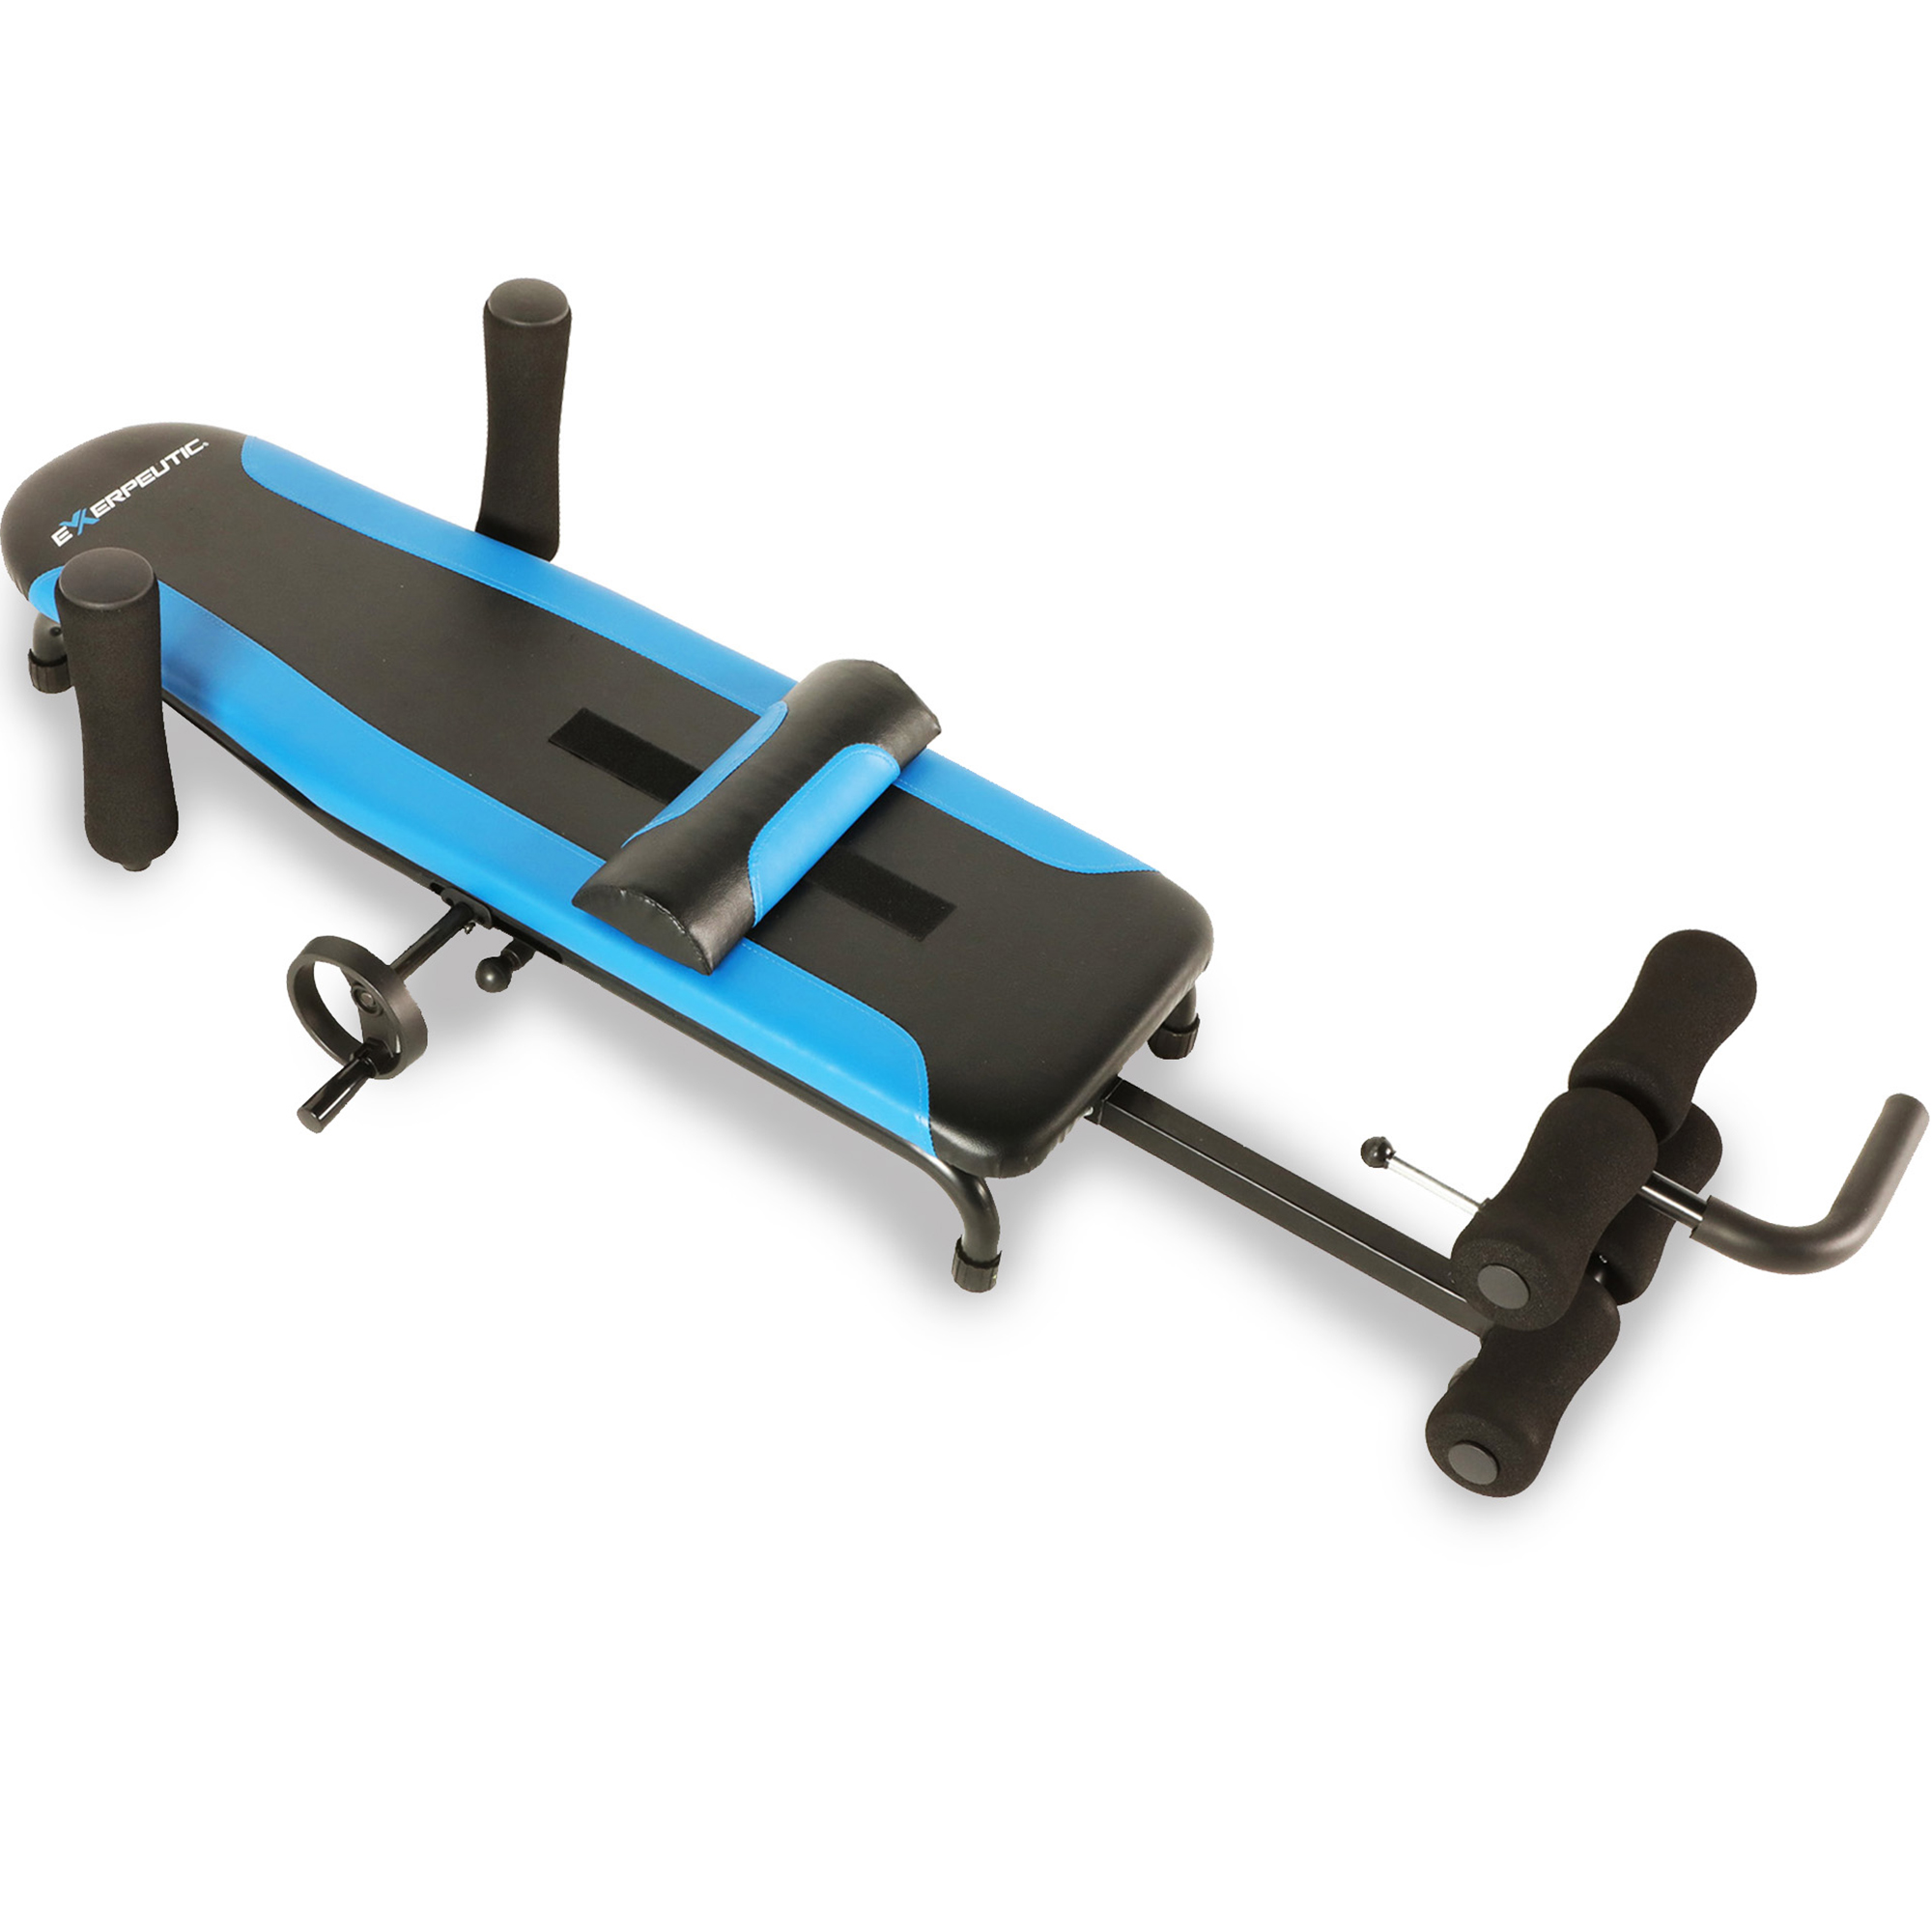 Exerpeutic 100 Back Stretch Traction Table Inversion Alternative with 300 Lbs. Weight Capacity - image 1 of 6